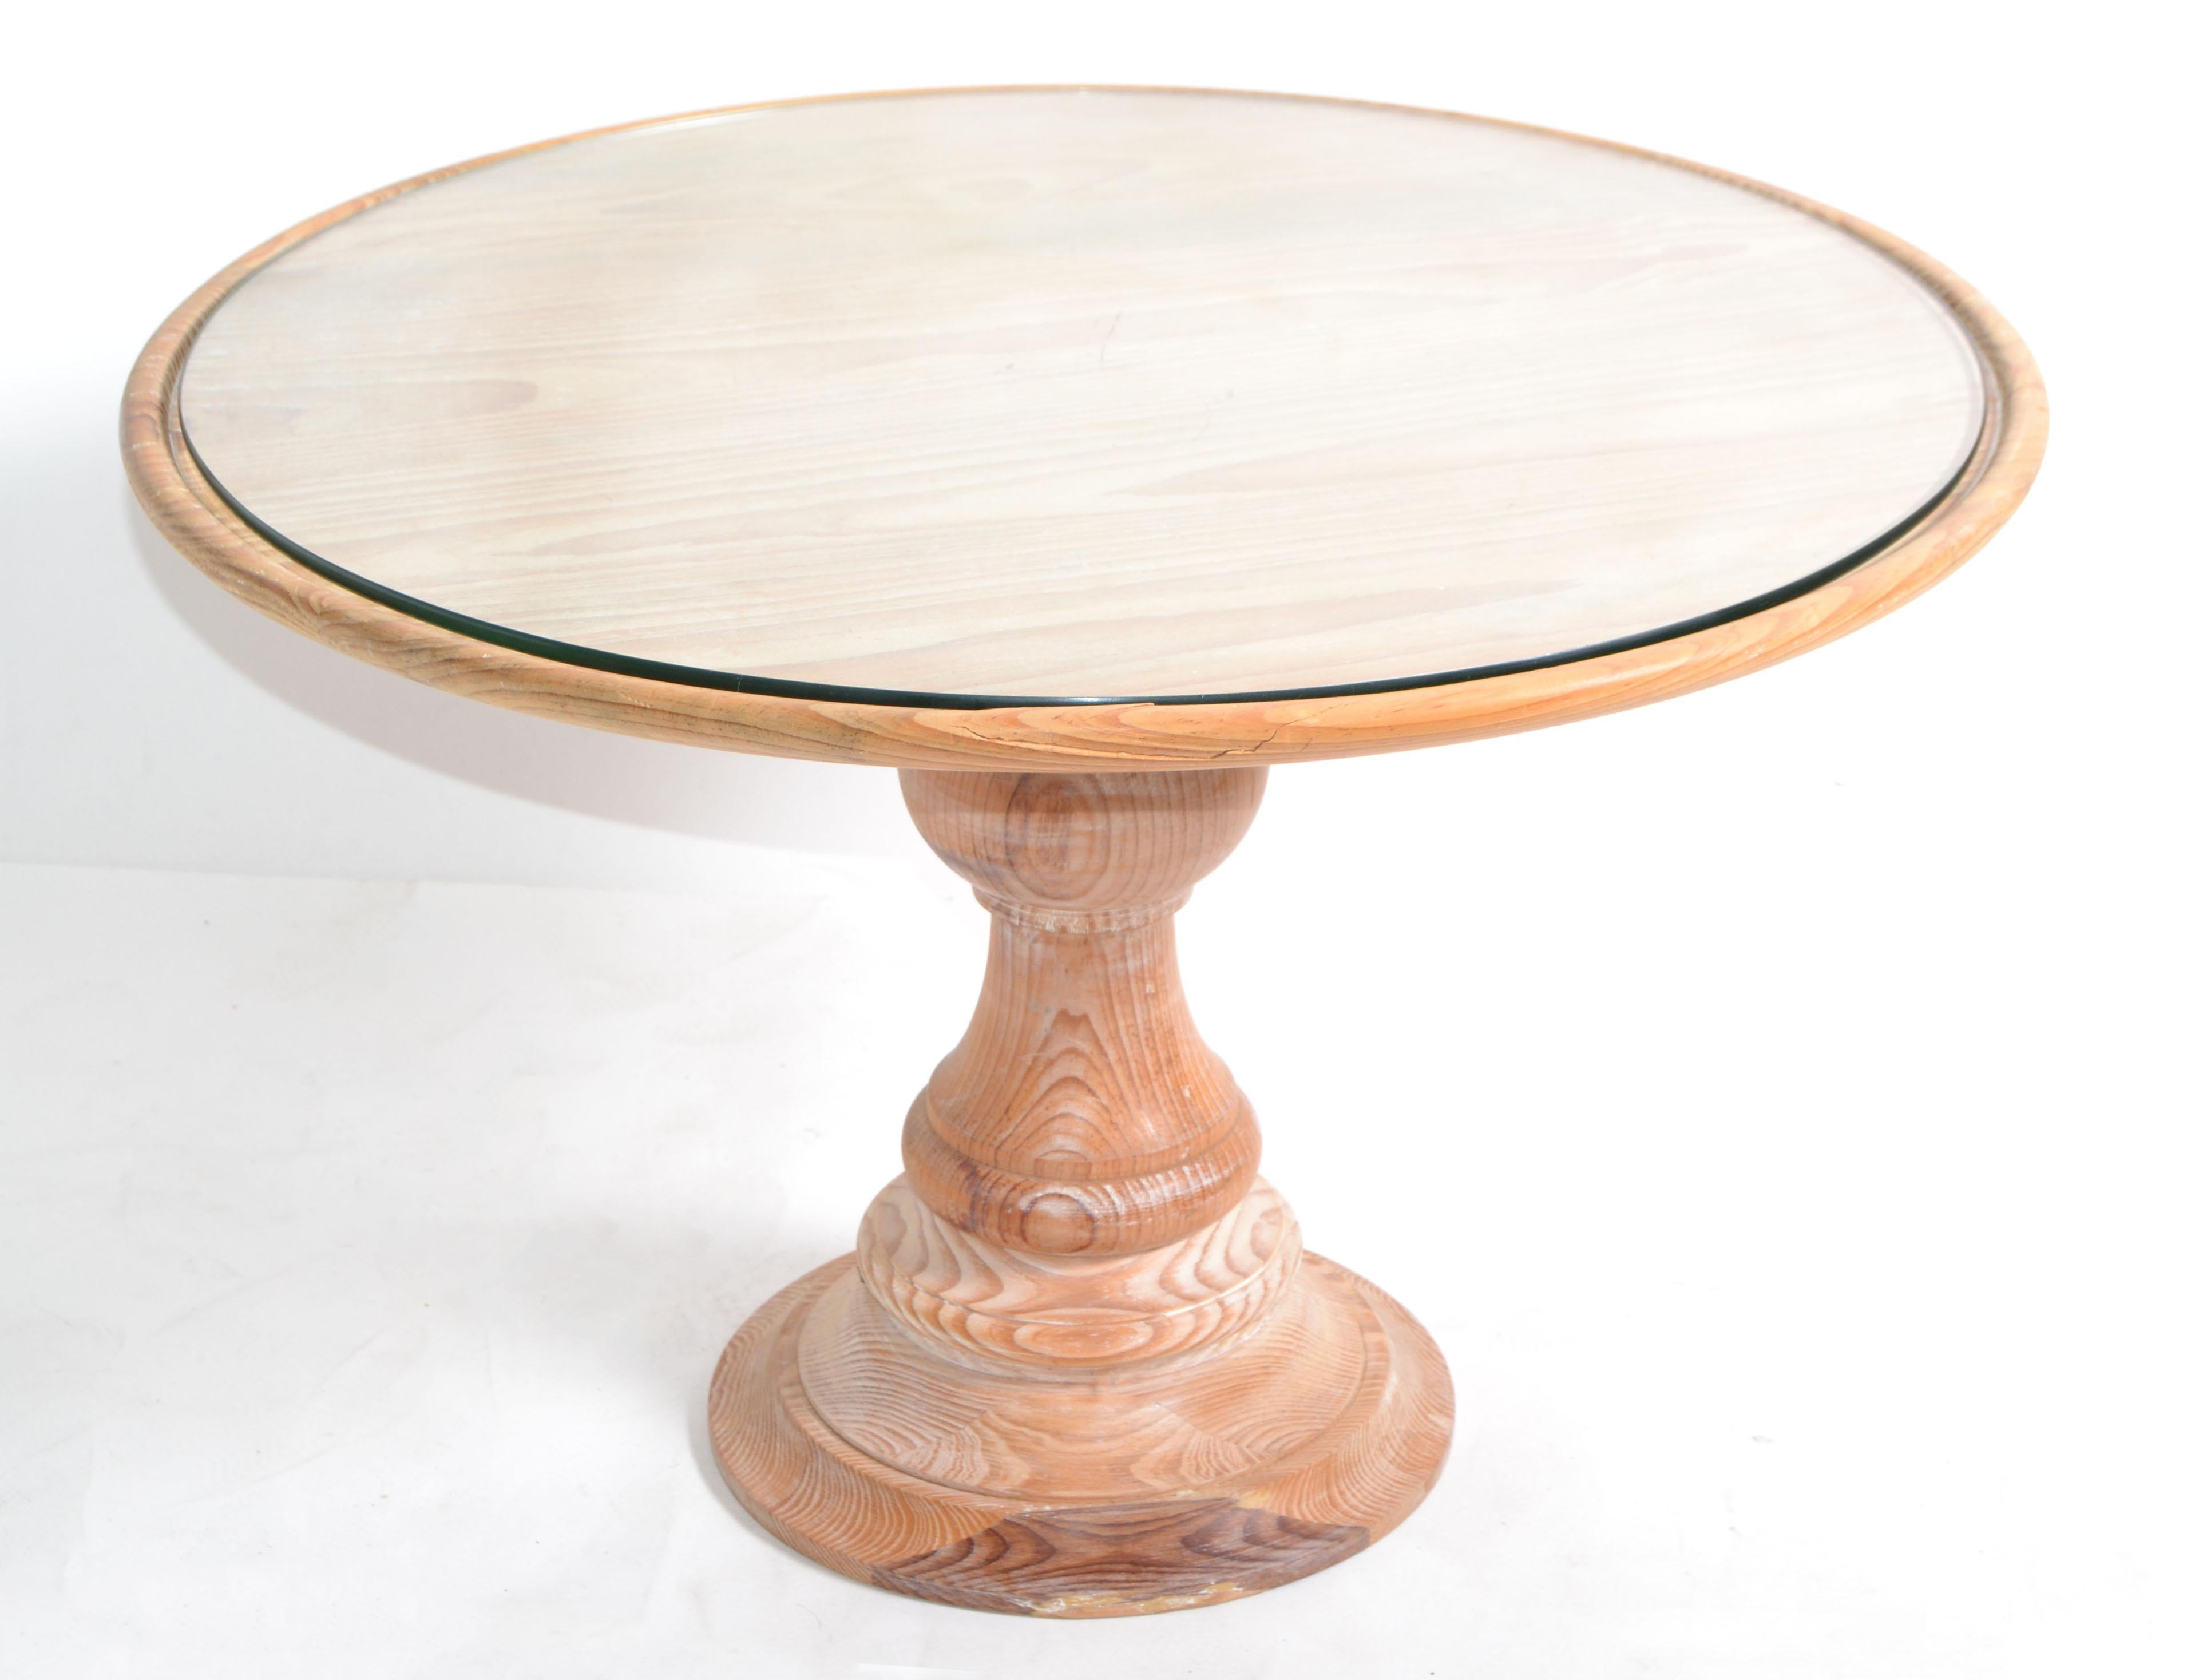 Mid-Century Modern American bleached oak coffee table with round 1/2-inch glass top.
The table is hand carved and made out of one piece of oak wood.
Note the beautiful organic grain pattern.
Heavy and sturdy craftsmanship.